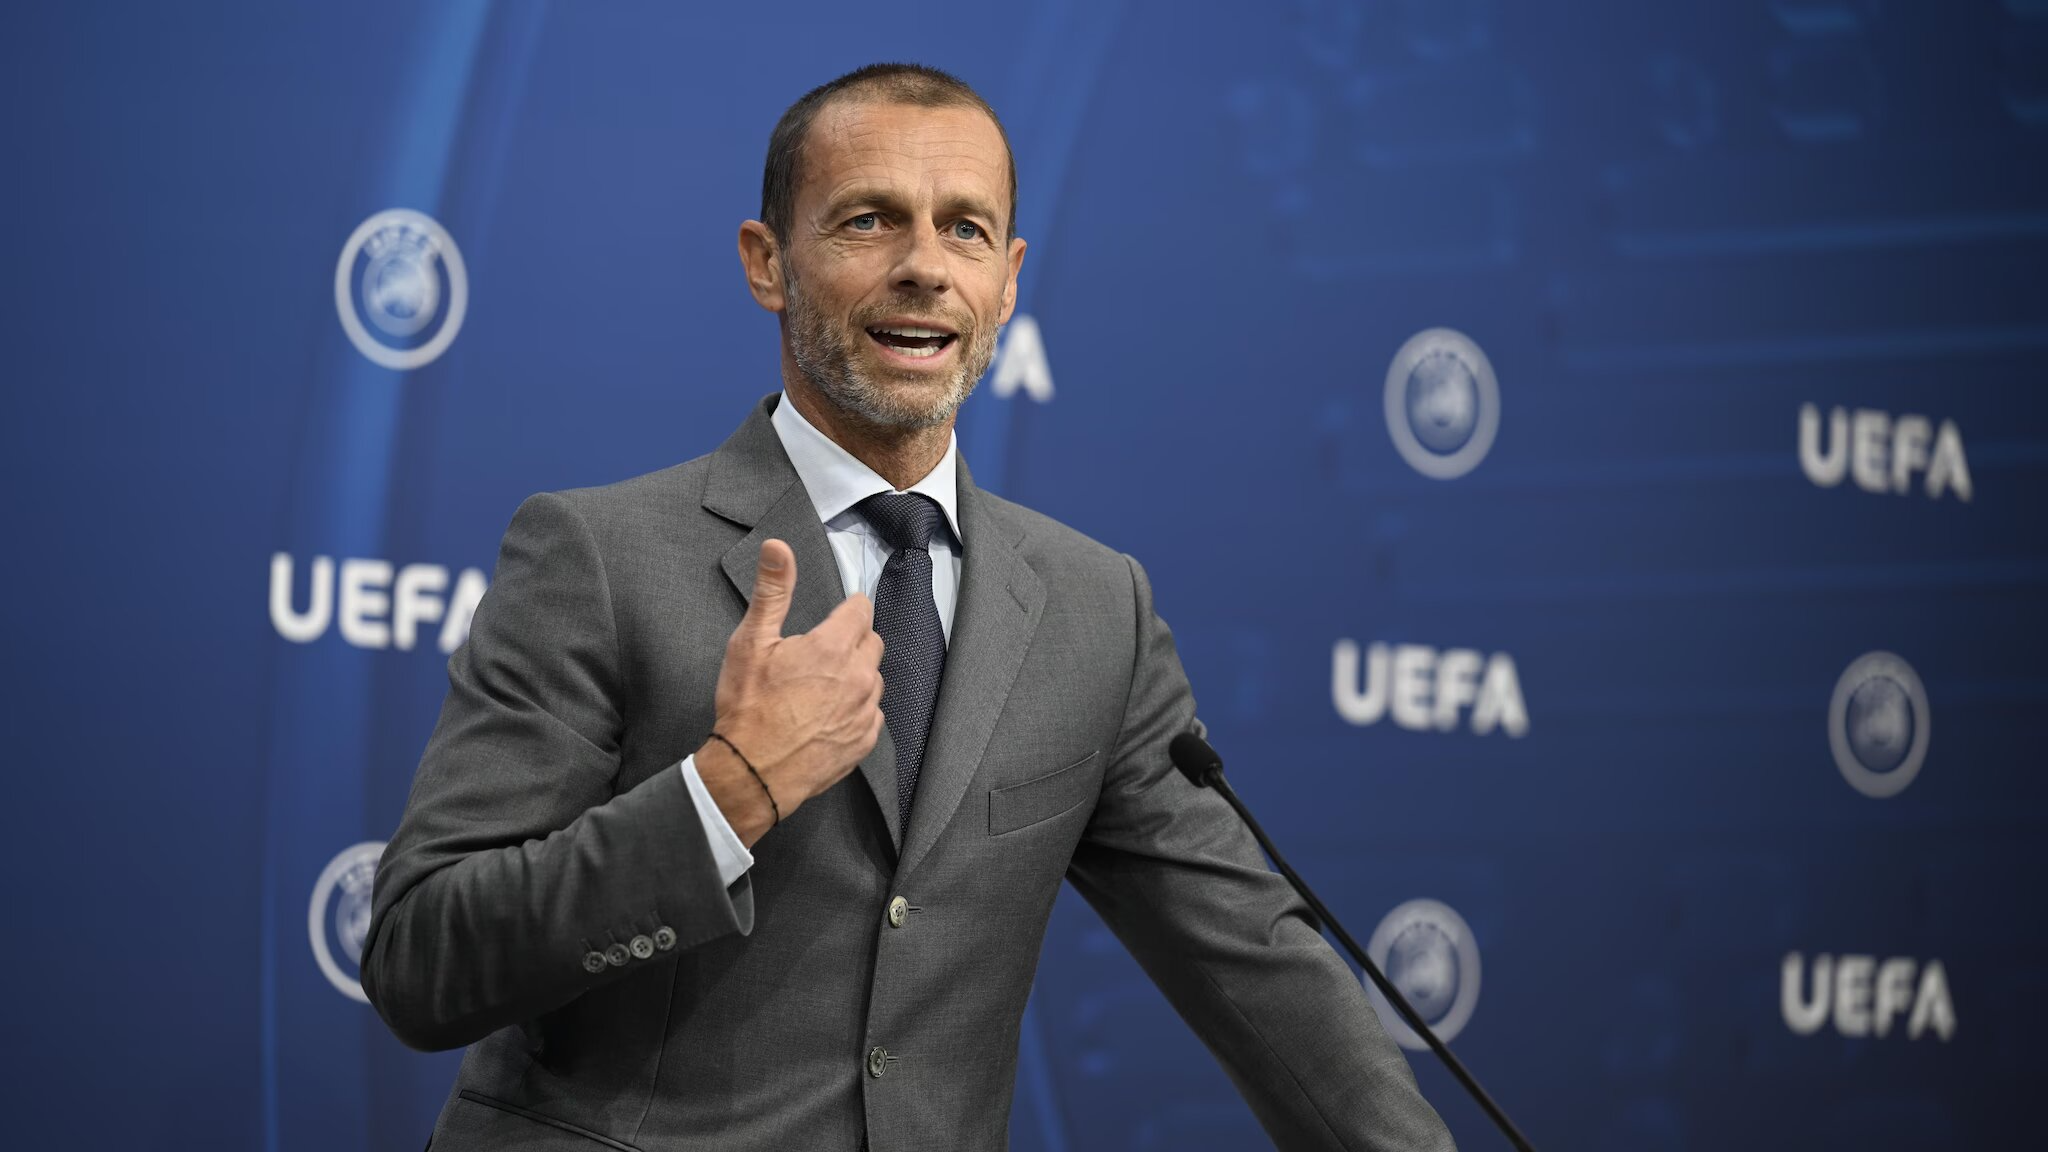 RFU Responds To UEFA President Čeferin About Suspension Of Russian Football